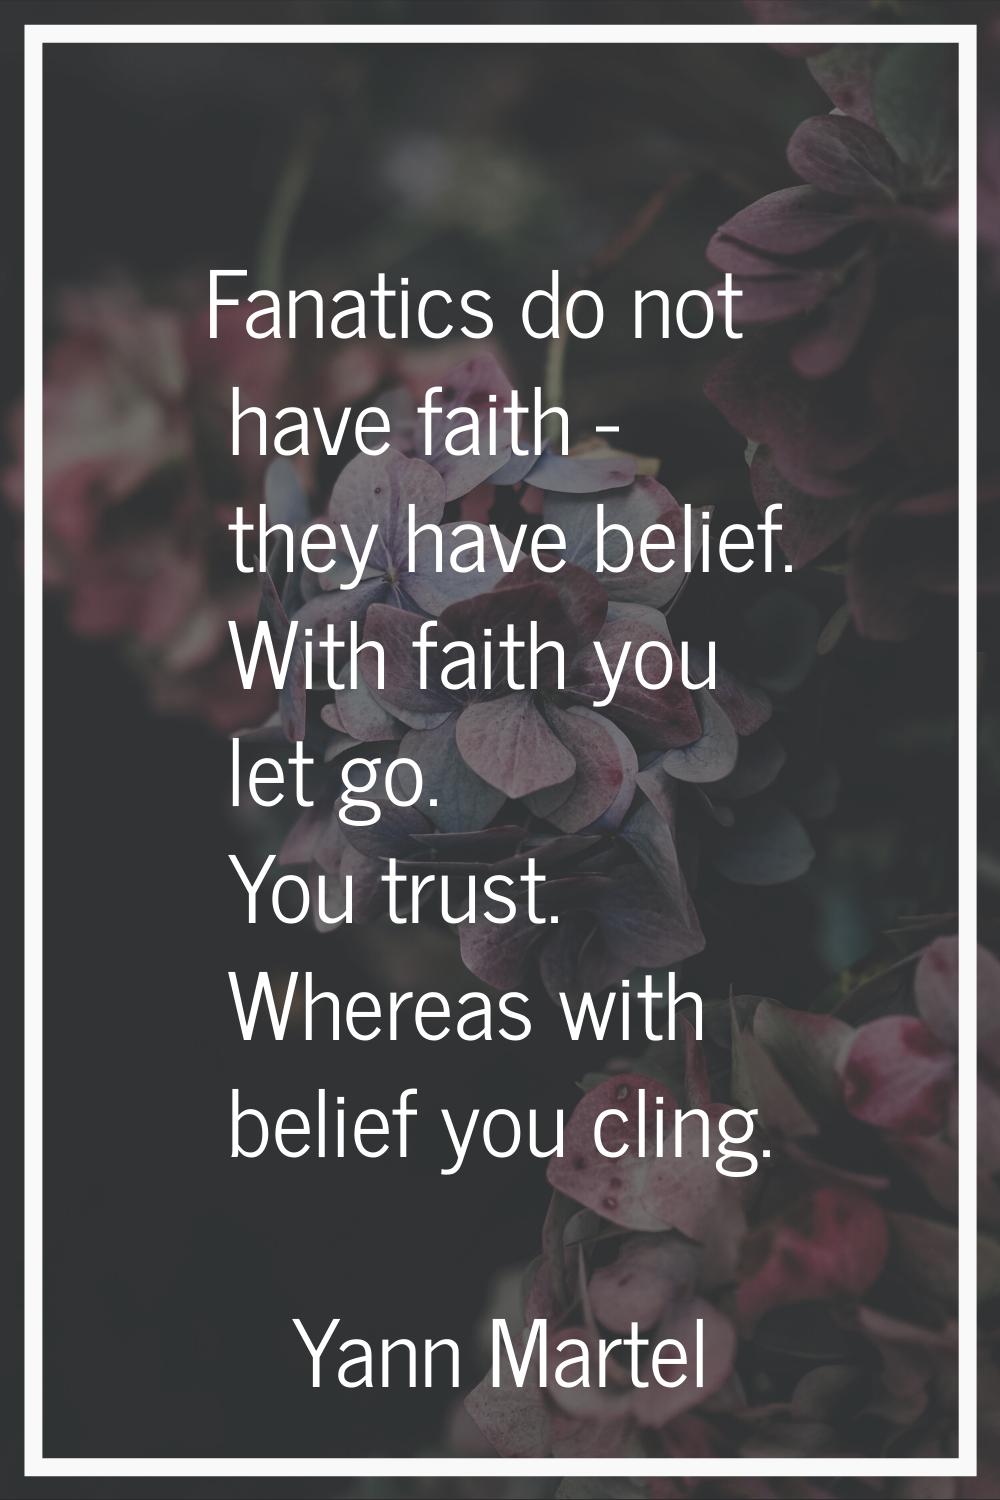 Fanatics do not have faith - they have belief. With faith you let go. You trust. Whereas with belie